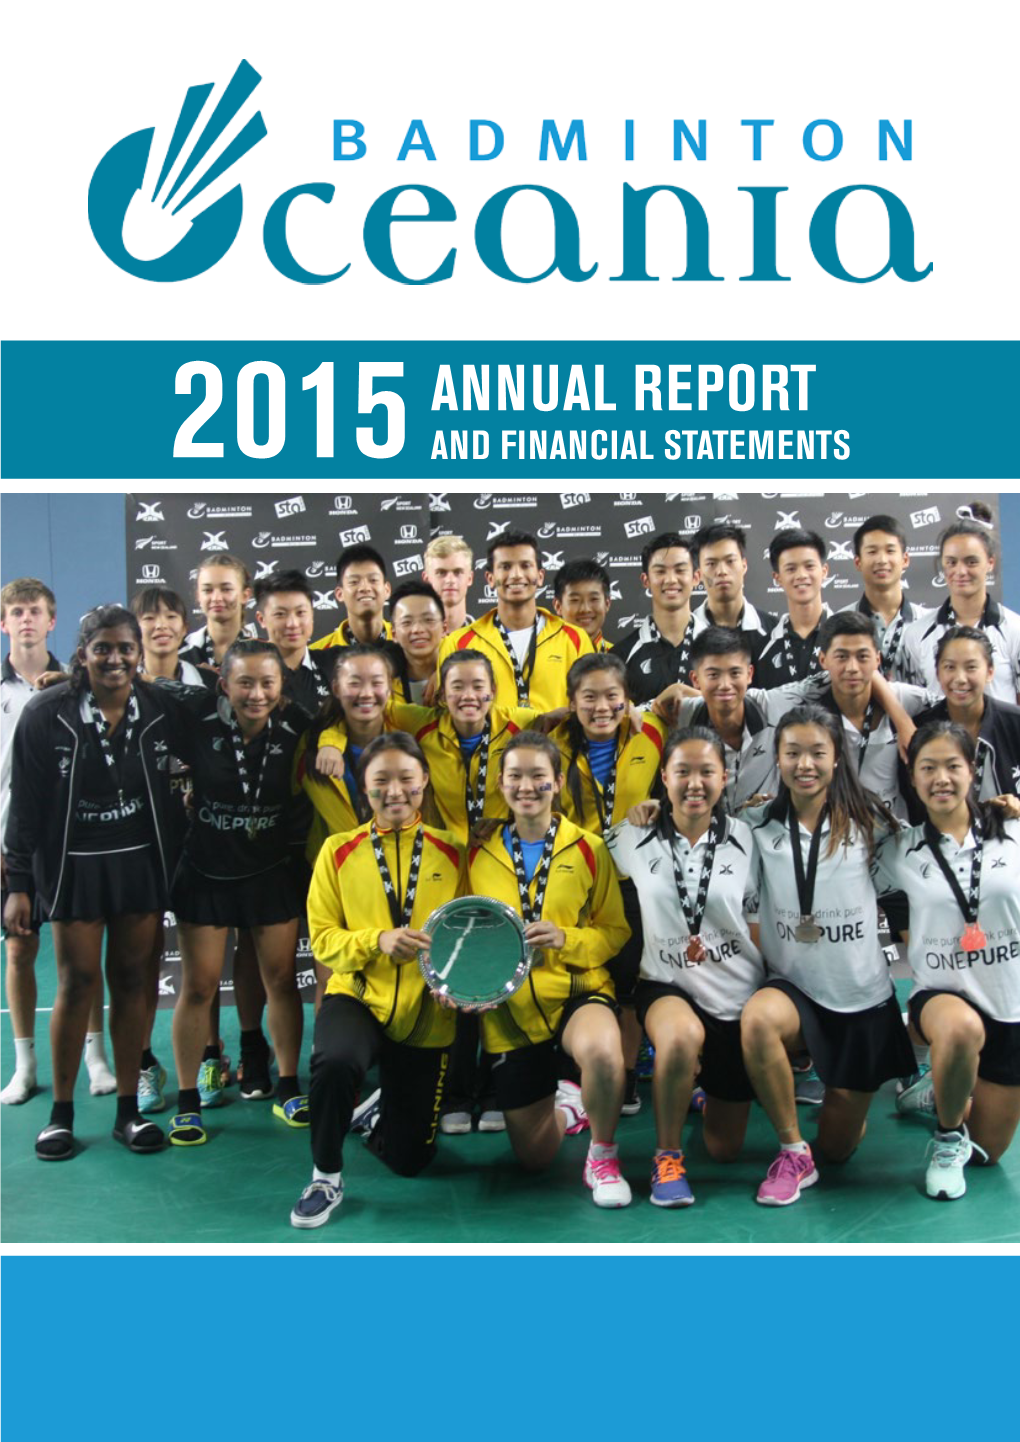 Annual Report 2015 and Financial Statements